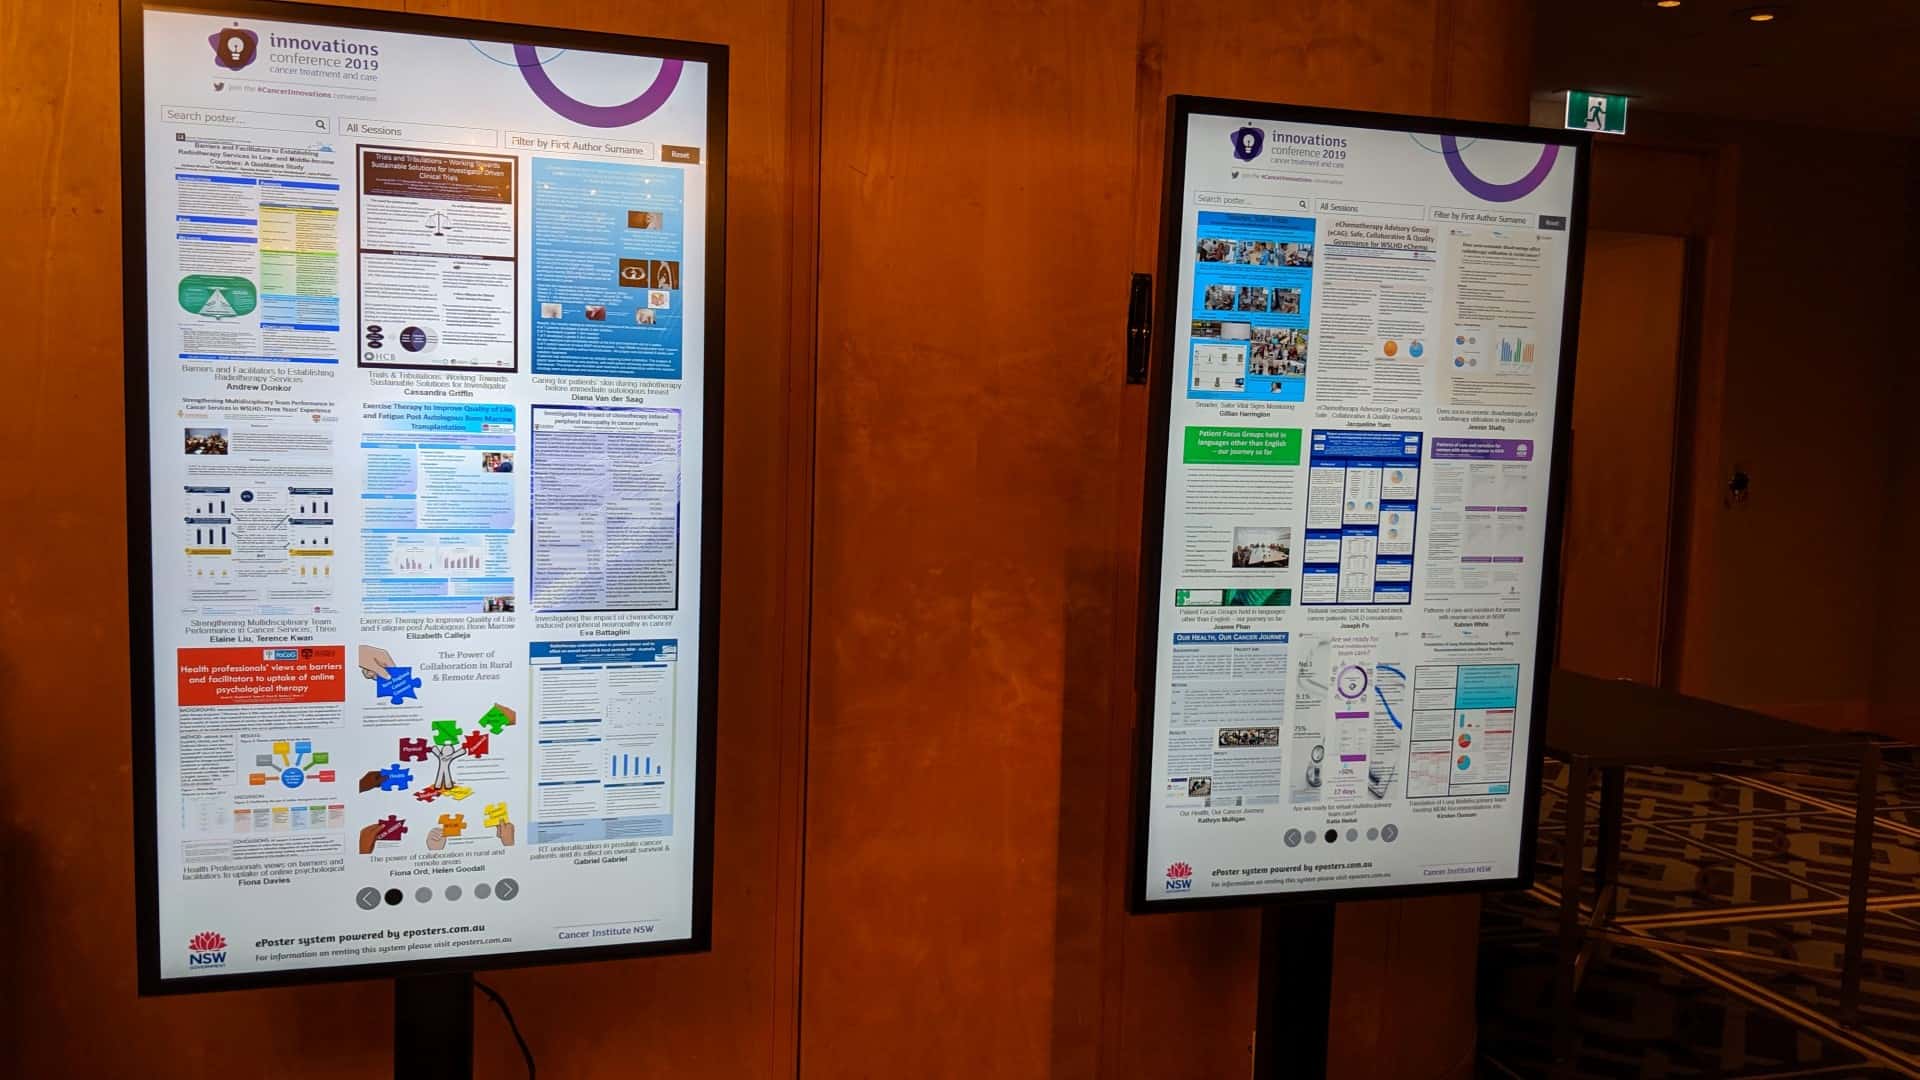 Advertise Me Interactive Digital Signage ePosters Cancer Institute NSW Conference 6